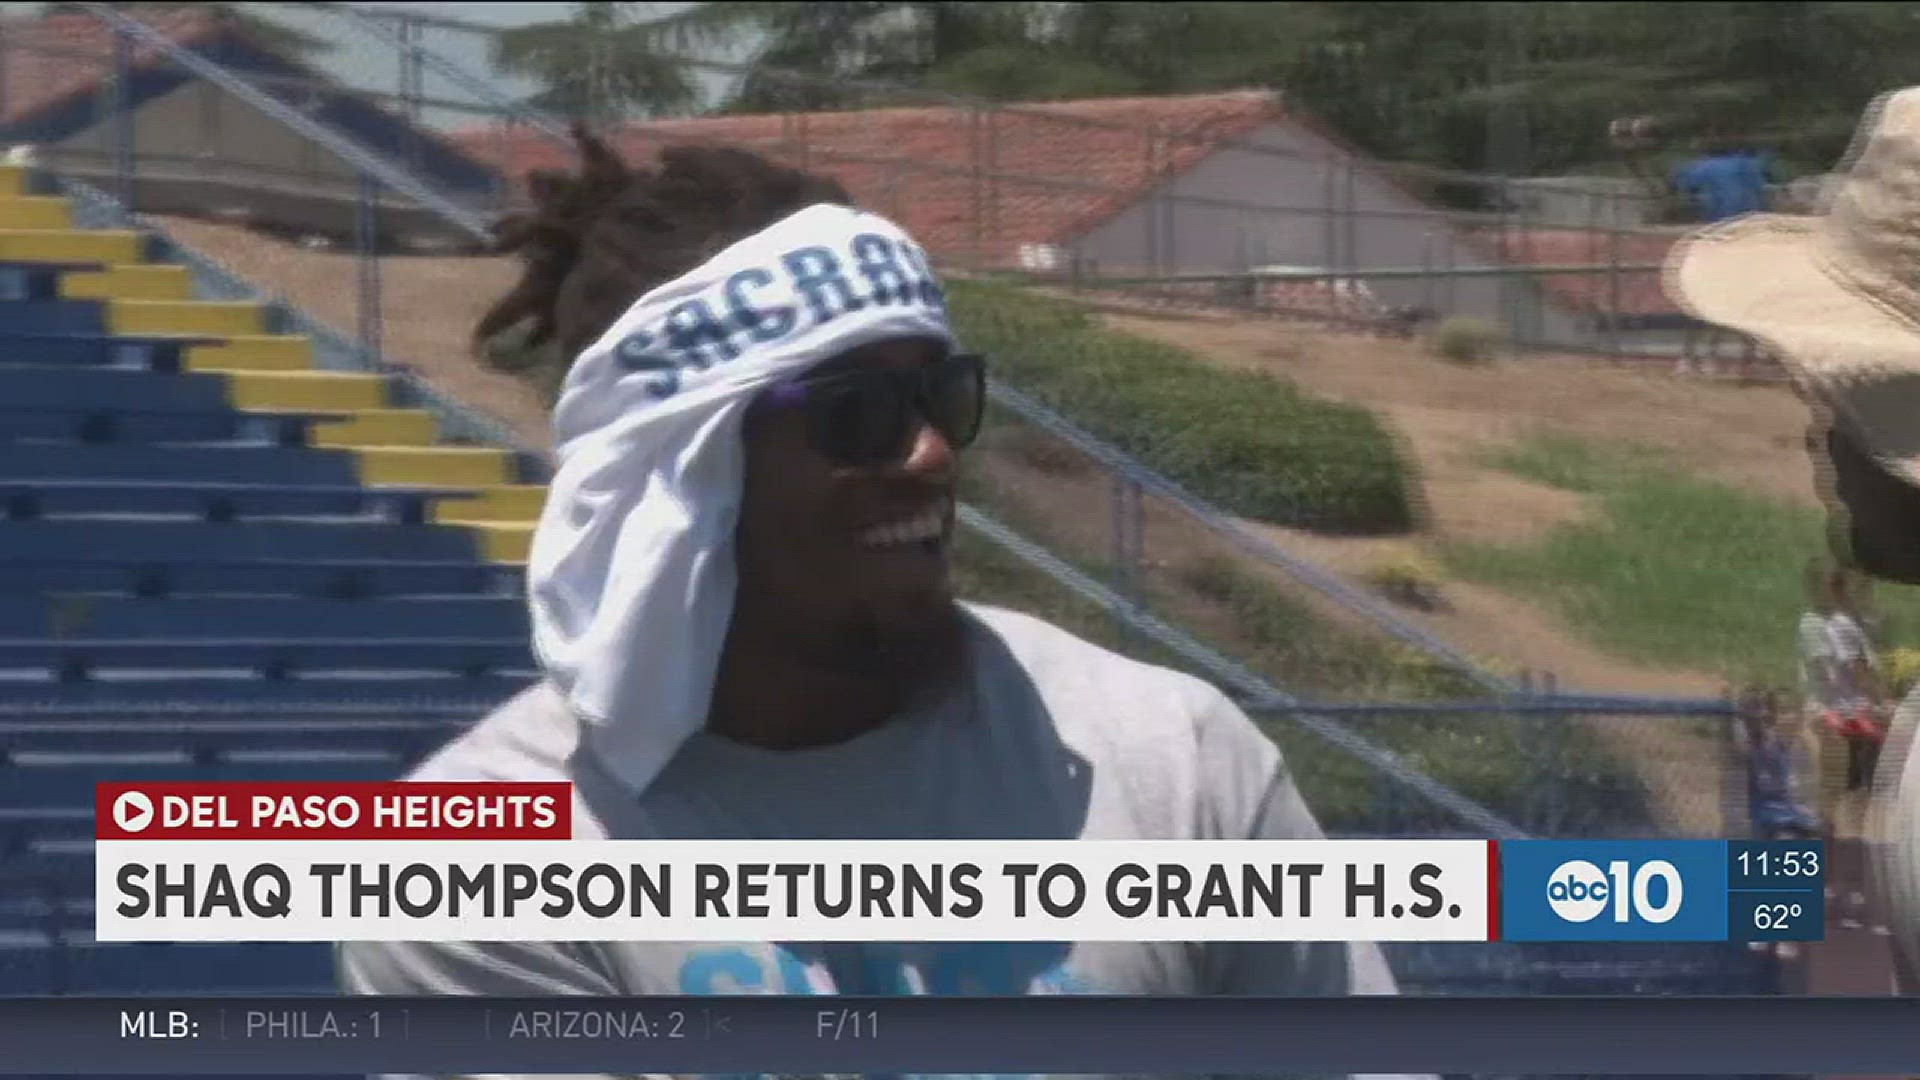 Carolina Panthers linebacker Shaq Thompson, a native of Sacramento's Del Paso Heights community, returned to Grant High School to hold his inaugural free youth football camp on Sunday.